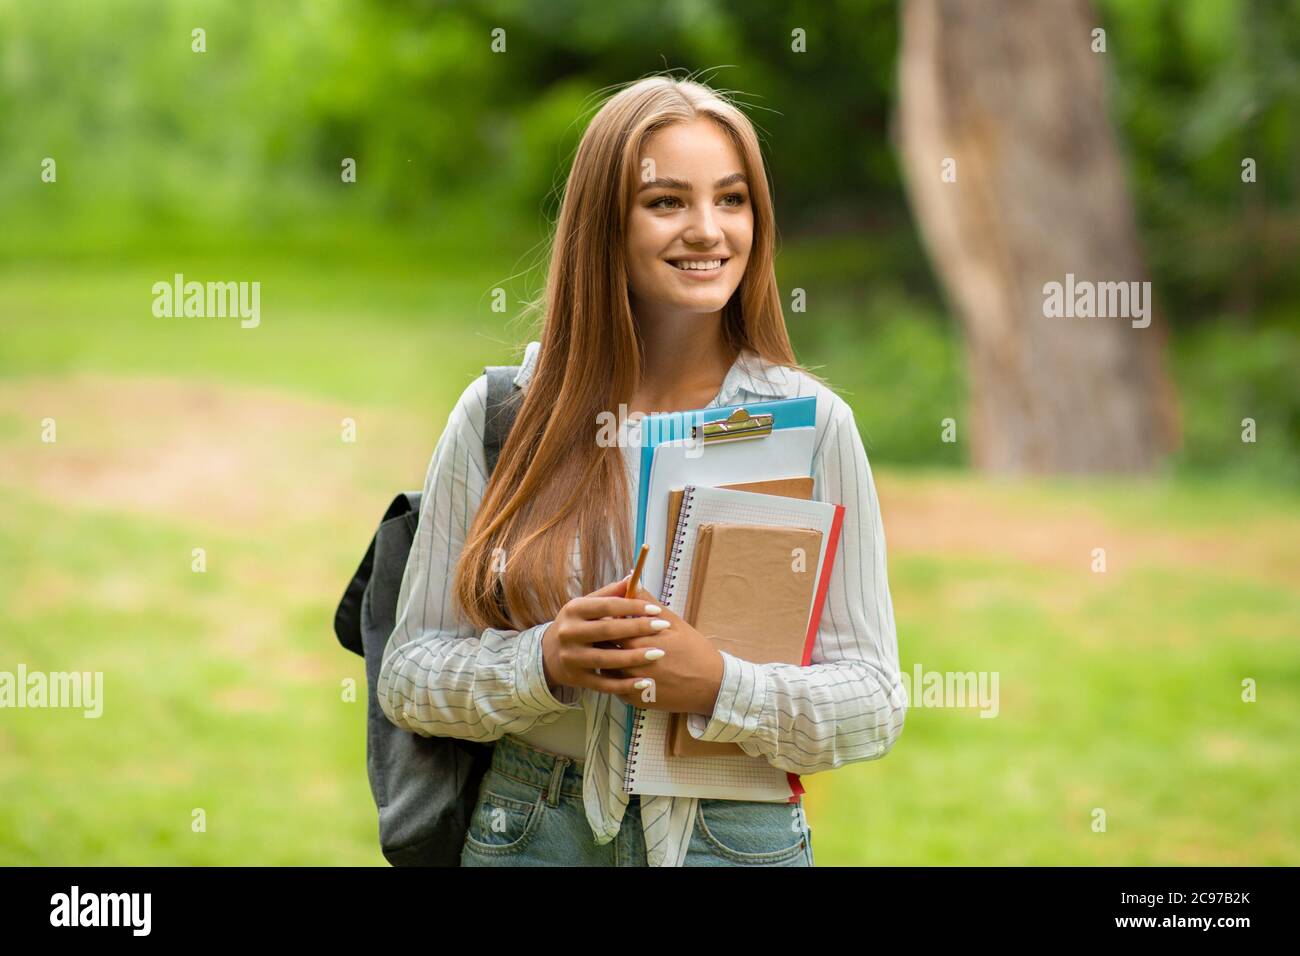 Outdoor Portrait Of Beautiful Student Girl With Workbooks And Backpack At Campus Stock Photo